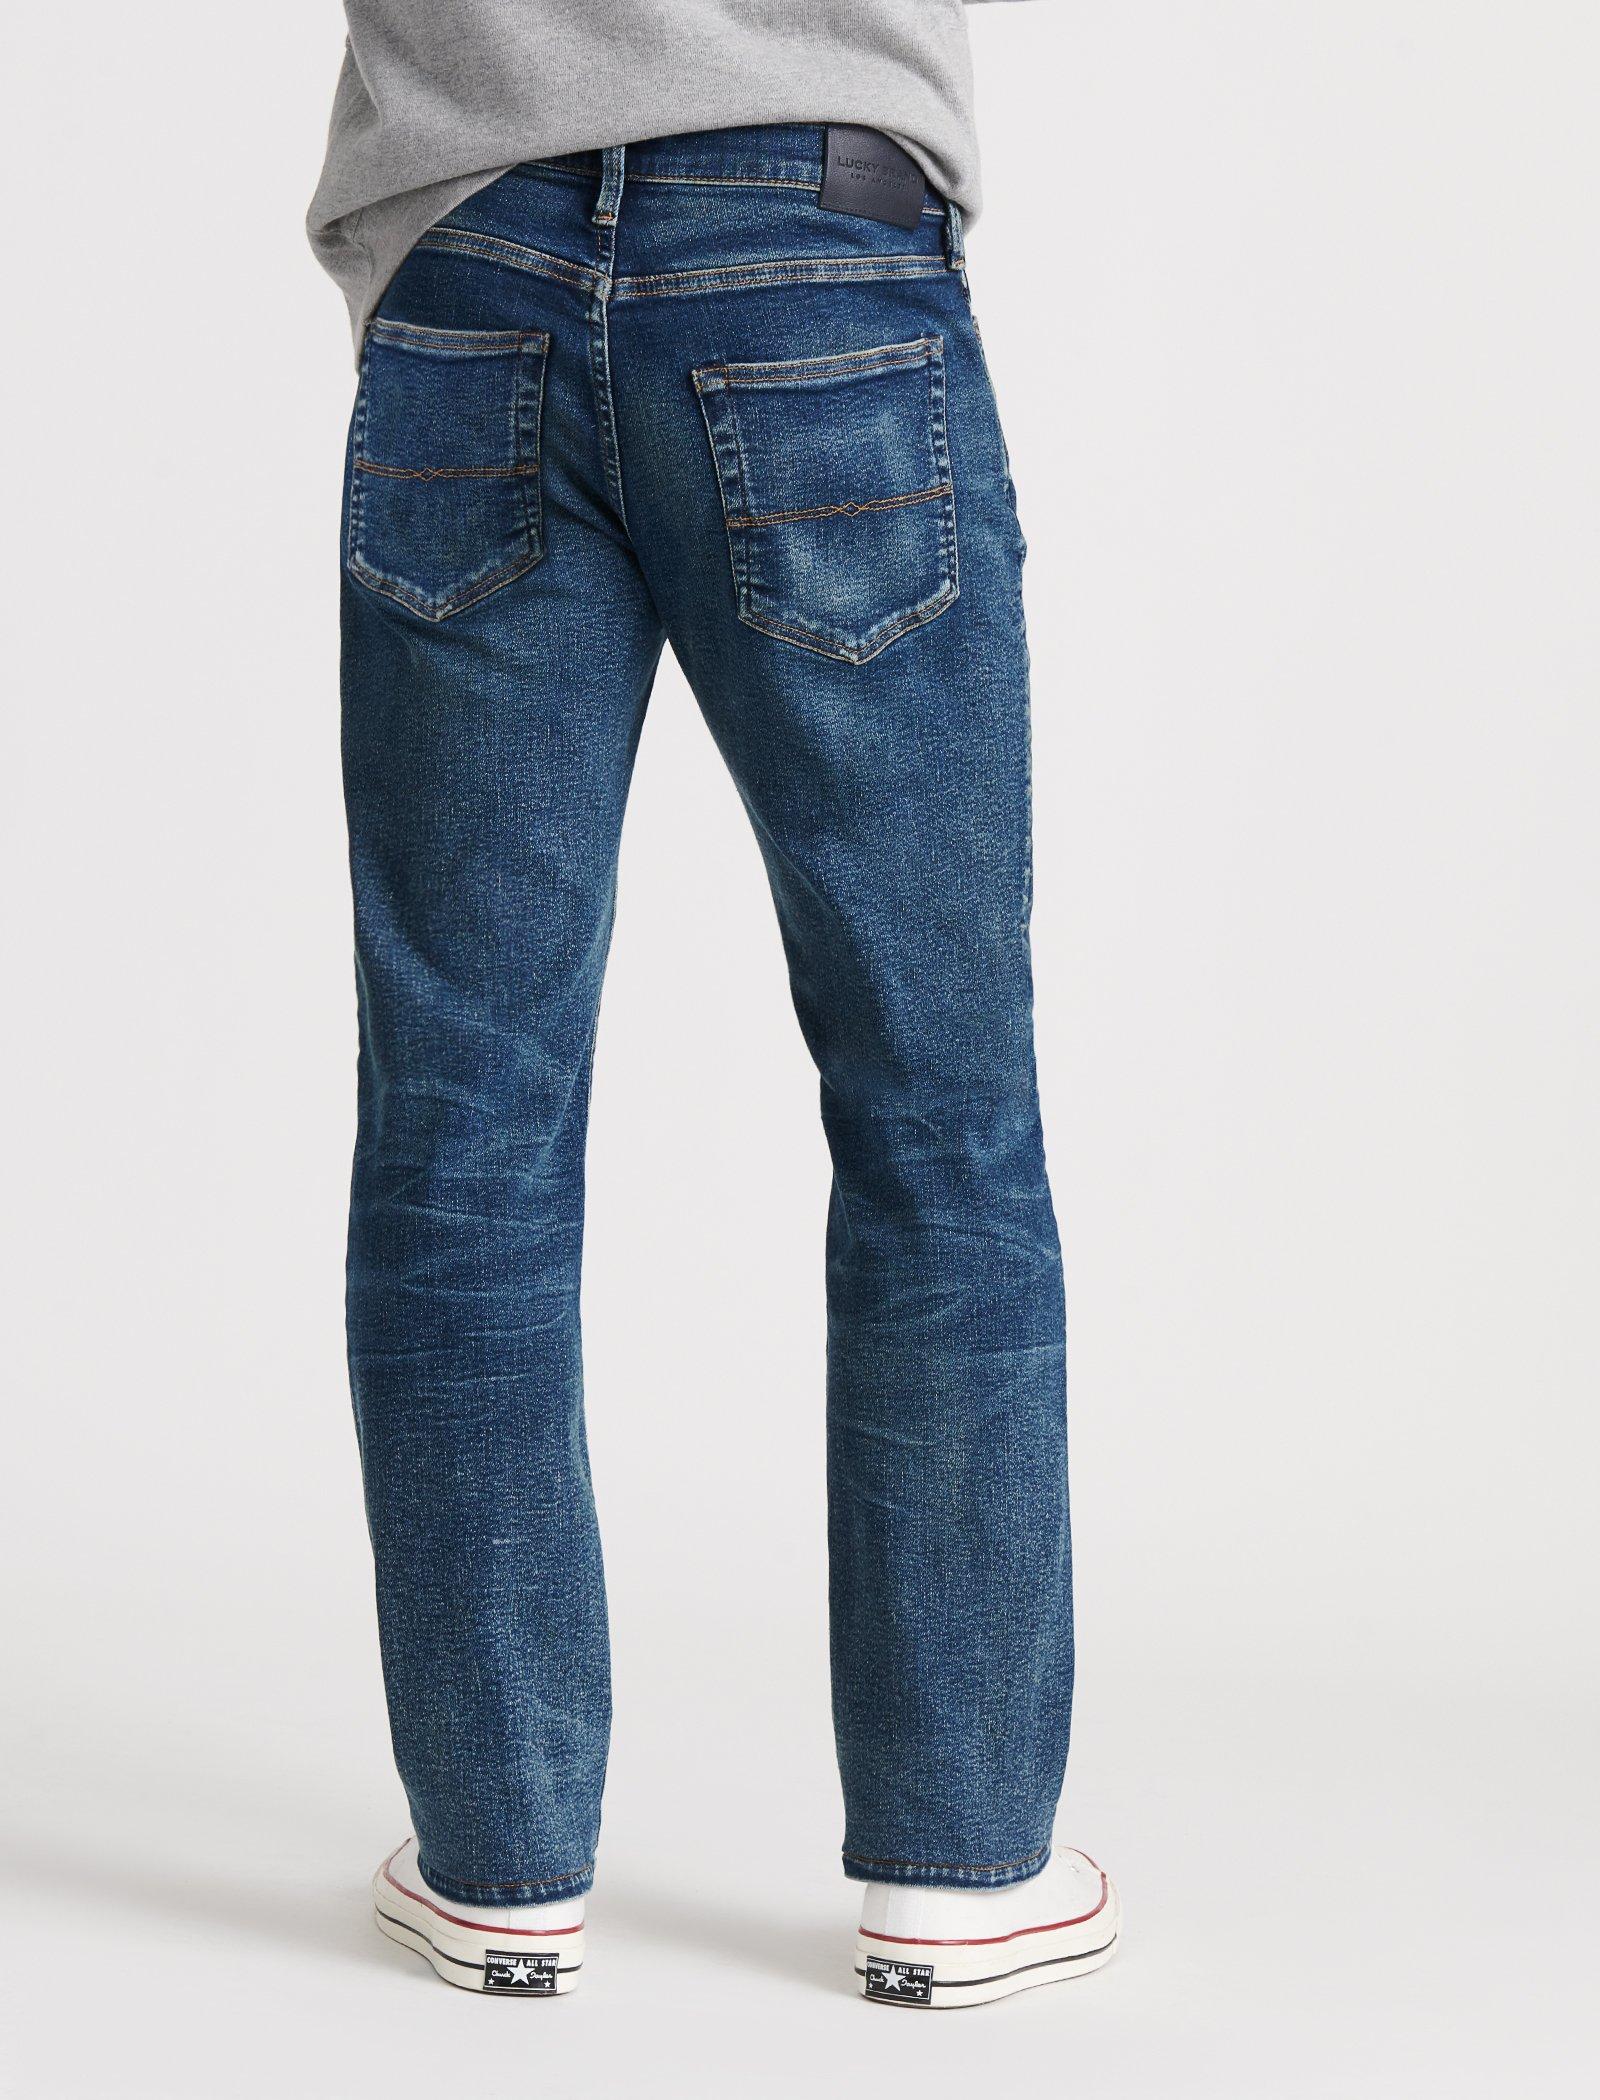 lucky brand jeans canada